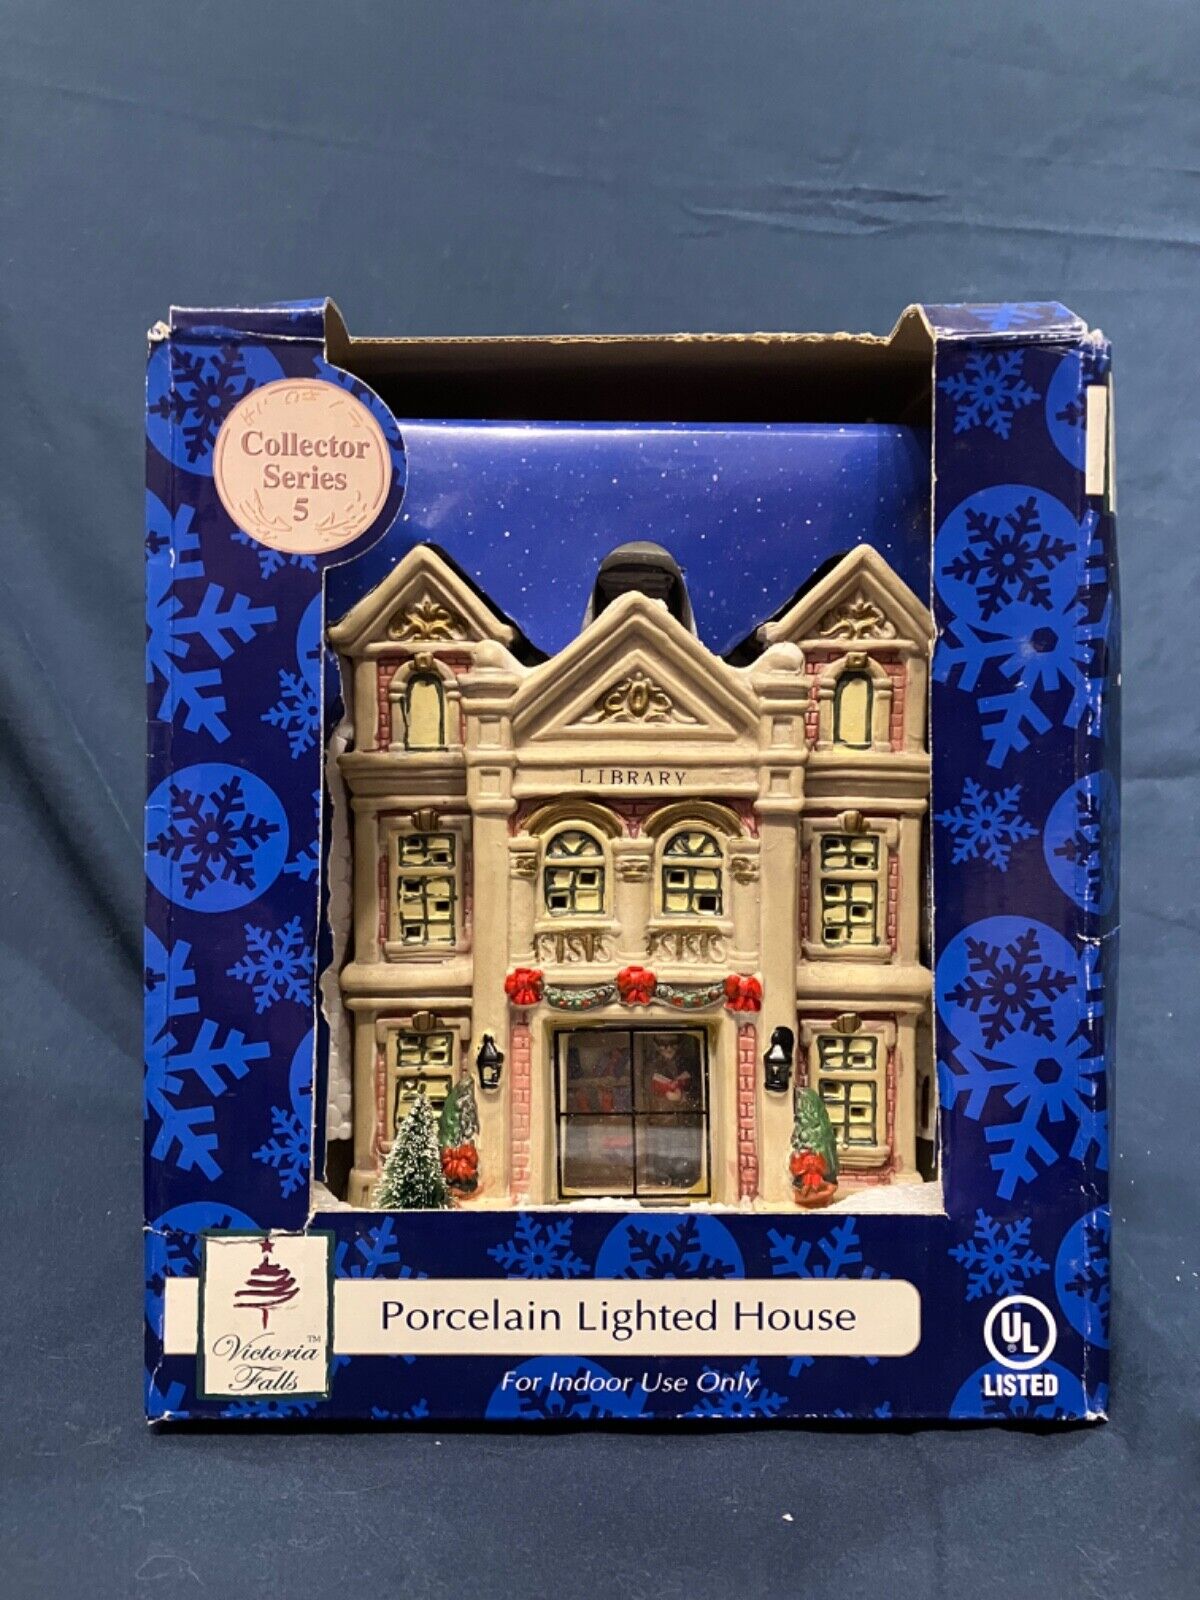 NEW Victoria Falls Series 5 Porcelain Lighted Library Christmas Village Miniatur